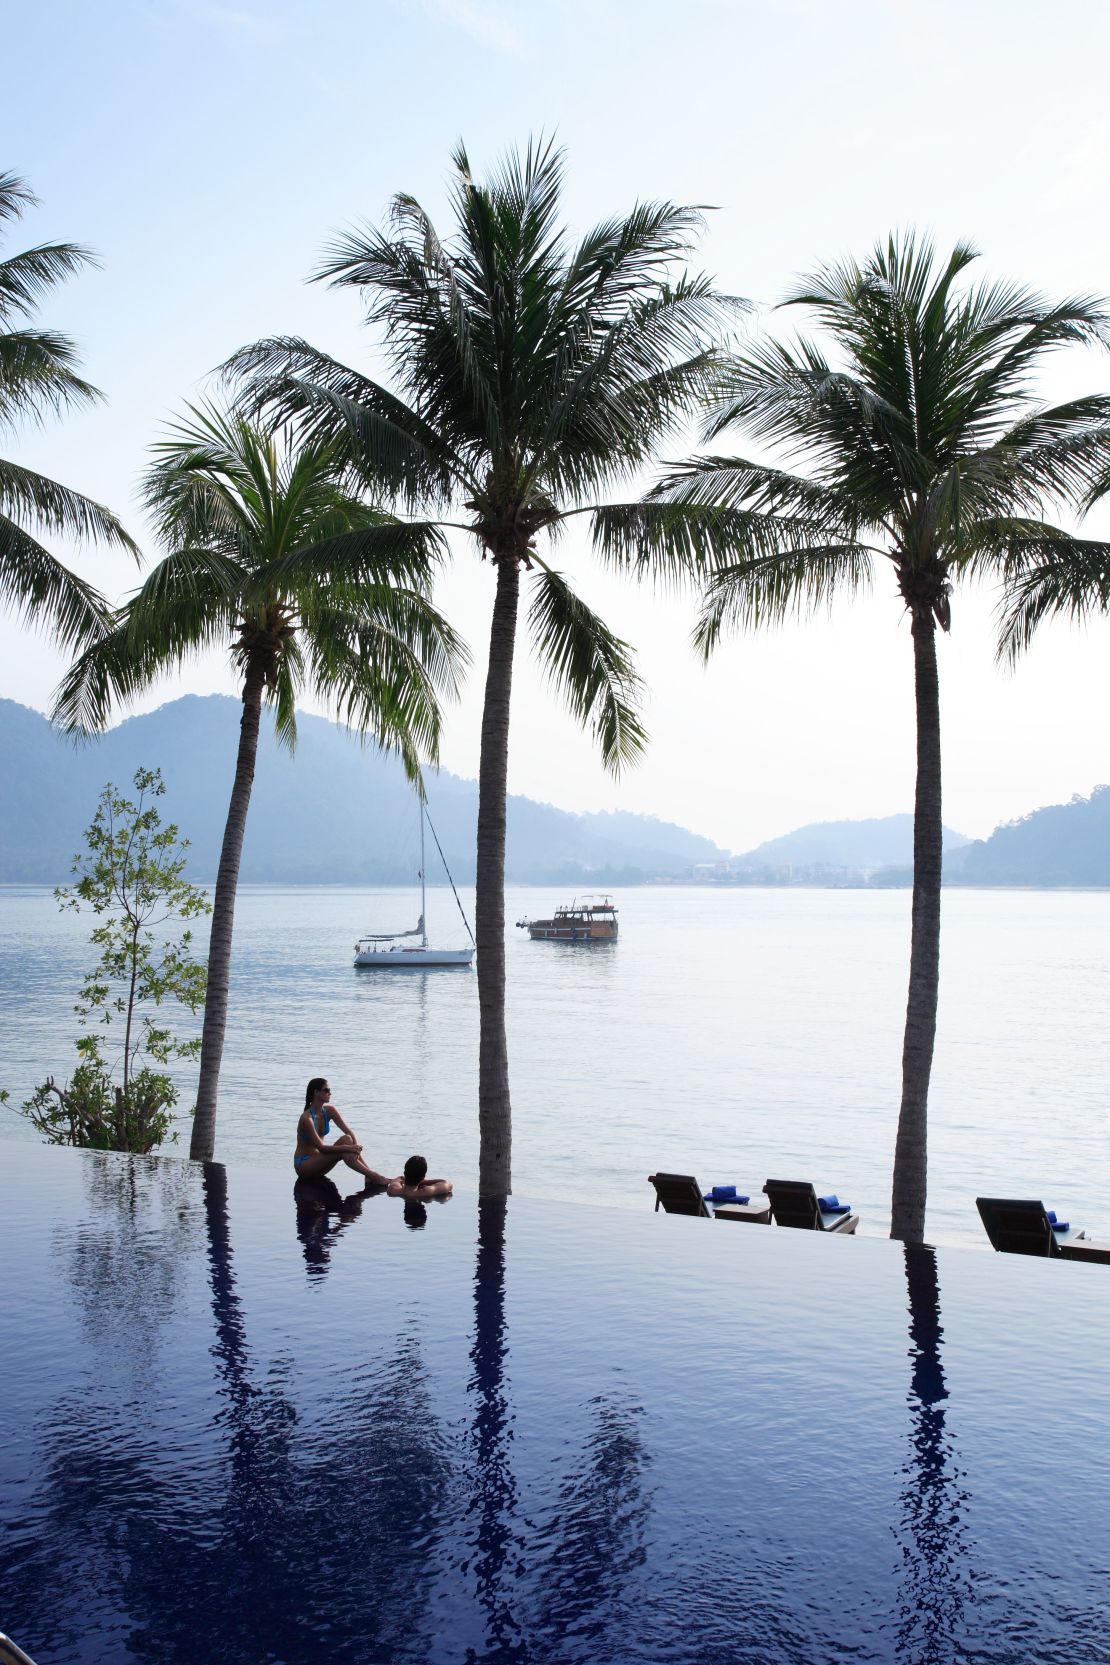 Whoever said money can't buy happiness never spent it on a Pangkor Laut massage.